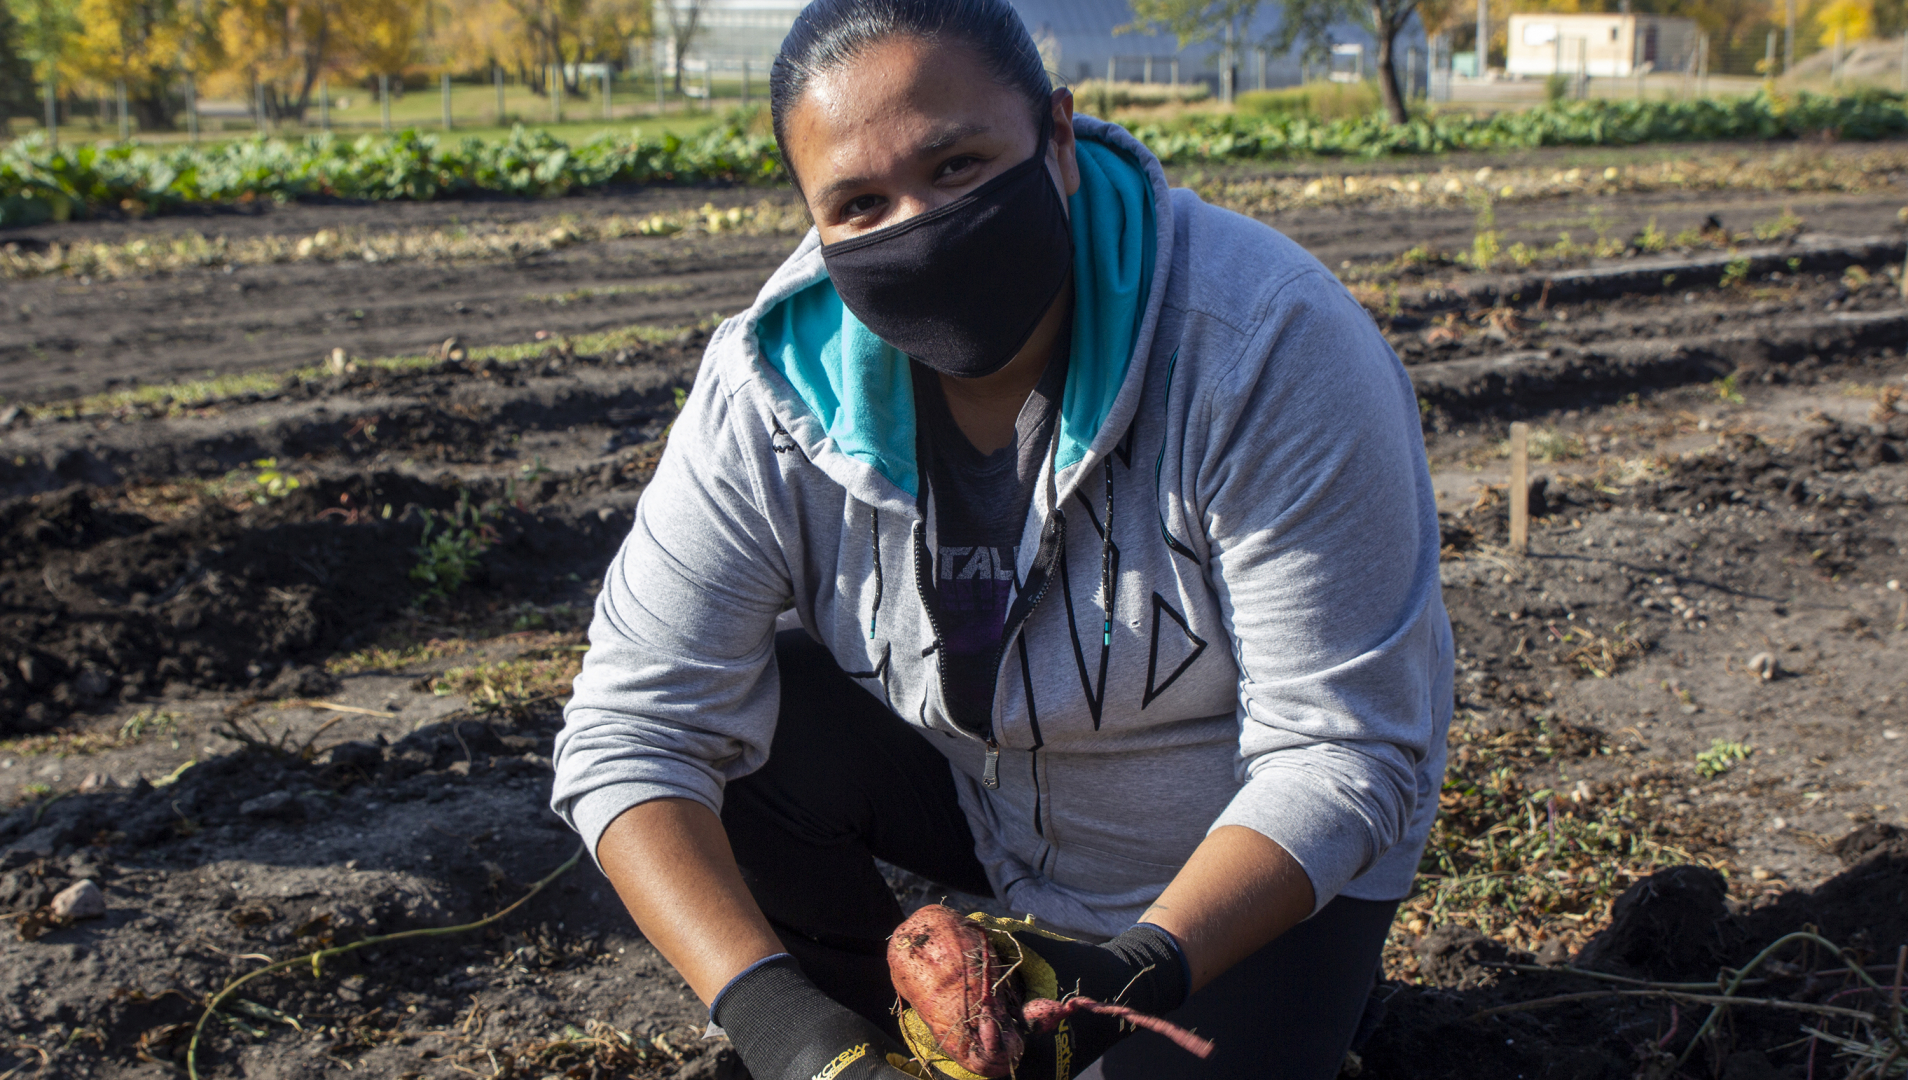 Horticultural Production student, Kateri Hope Roulette, poses for a photo with a sweet potato she's harvested